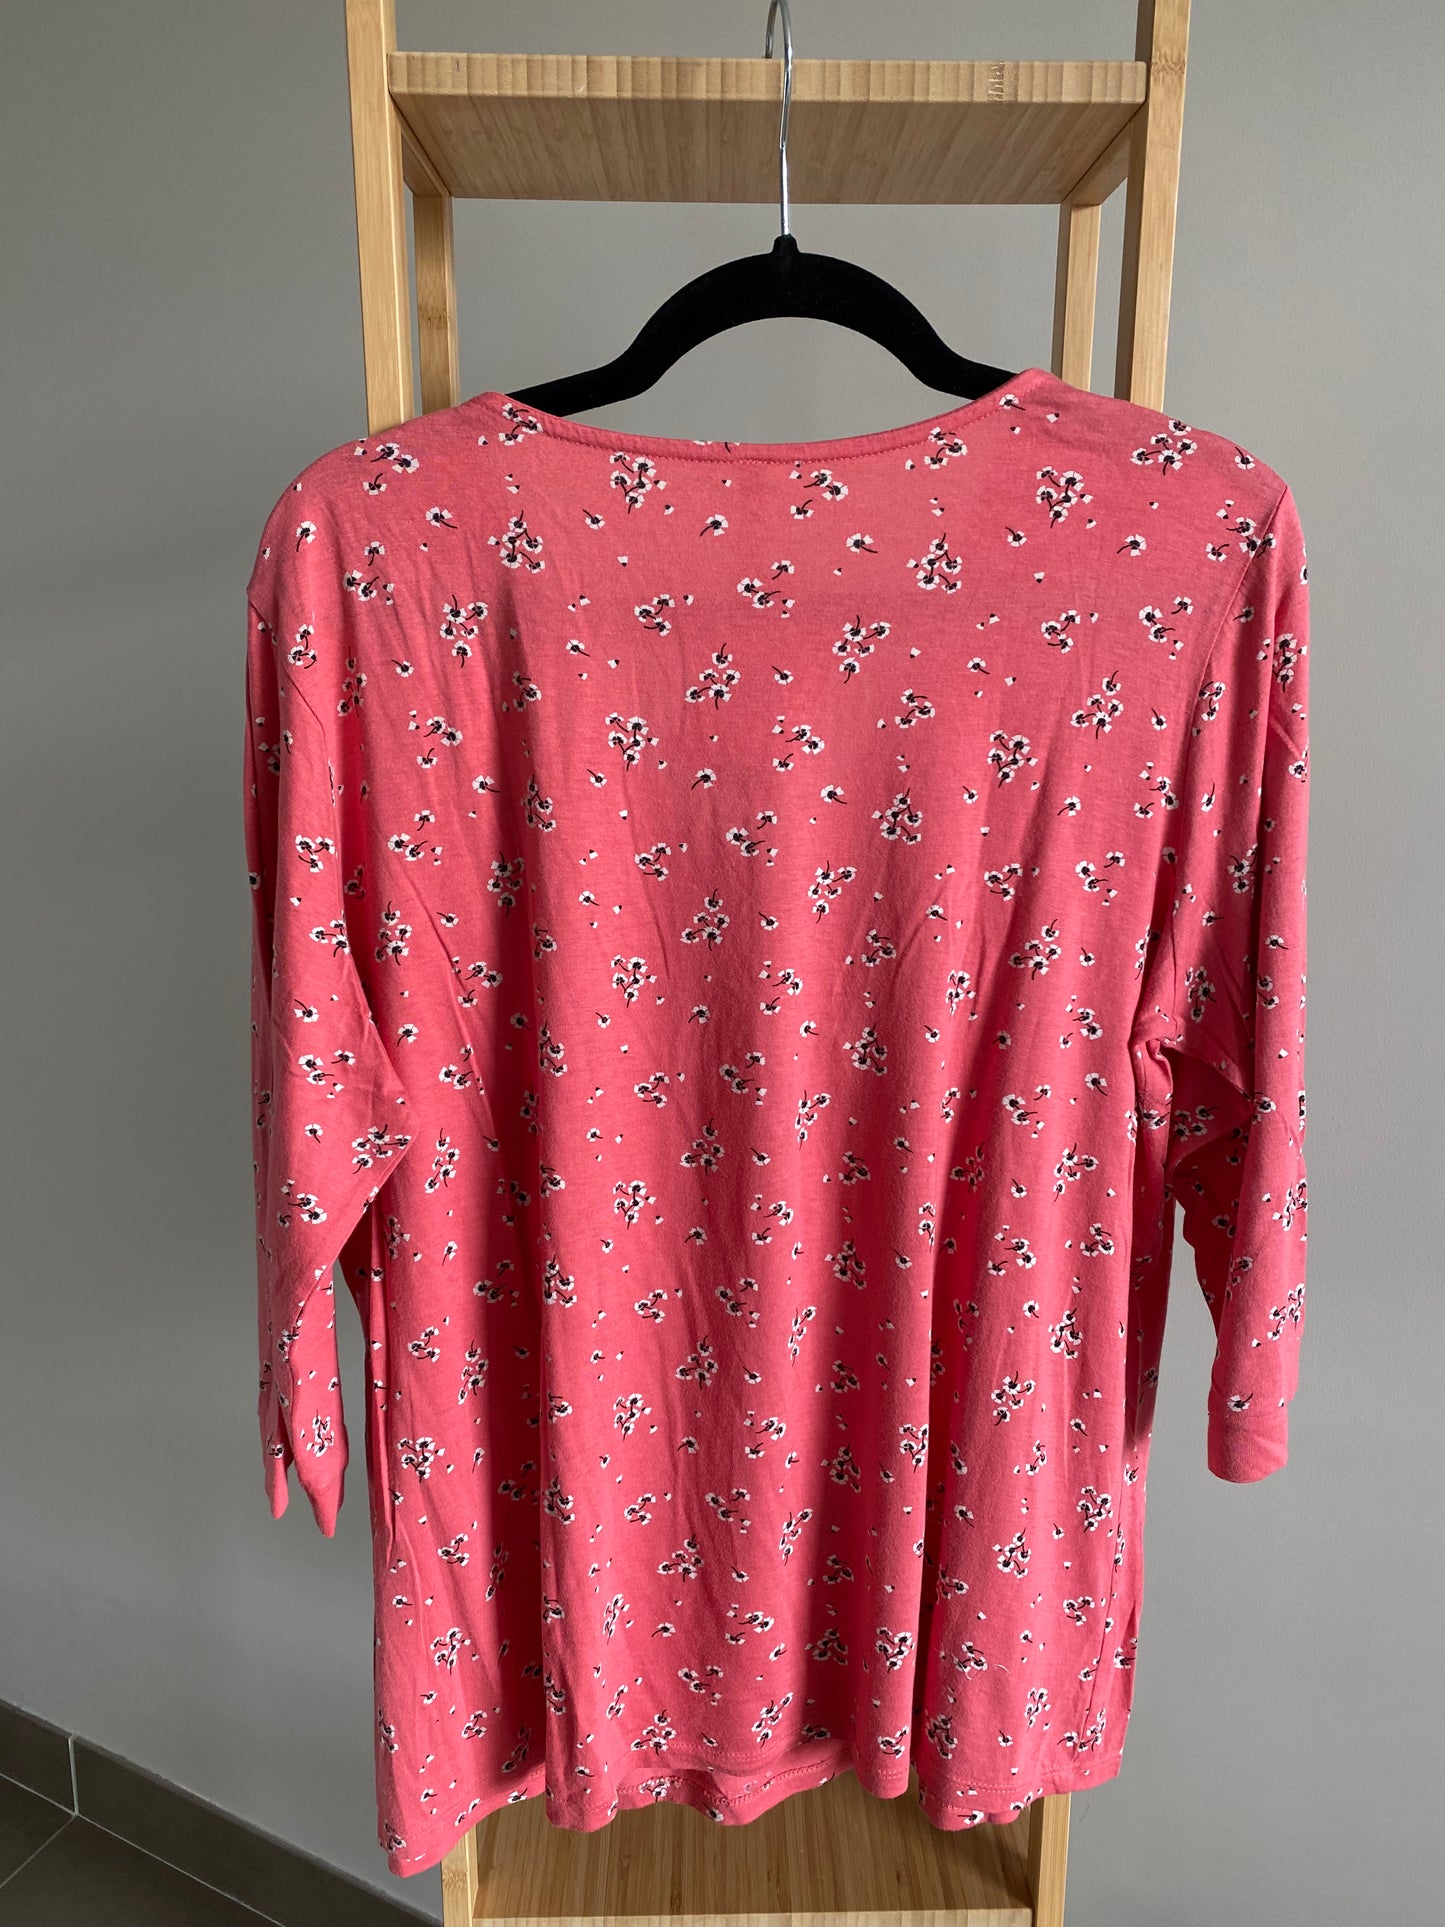 Blouse Blancheporte rose motifs Taille 44/46